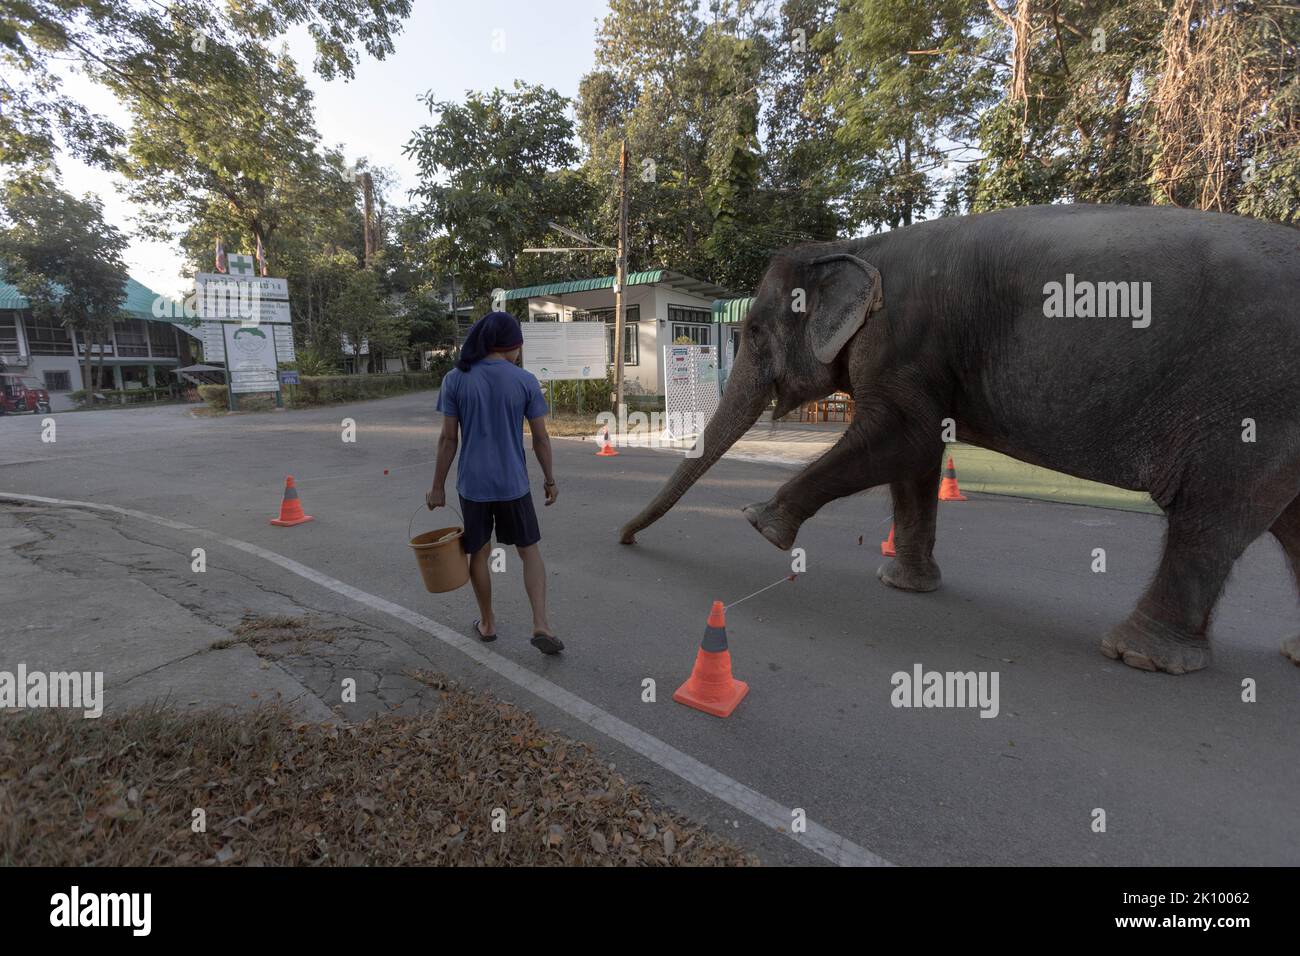 Chand Nuan, an elephant with circulation issues, completes her daily exercise routine with the help of her keeper. The Friends of the Asian Elephant hospital, in northern Thailand, is the first elephant hospital in the world. Since 1993 it has treated elephants with ailments ranging from eye infections to landmine injuries. Stock Photo